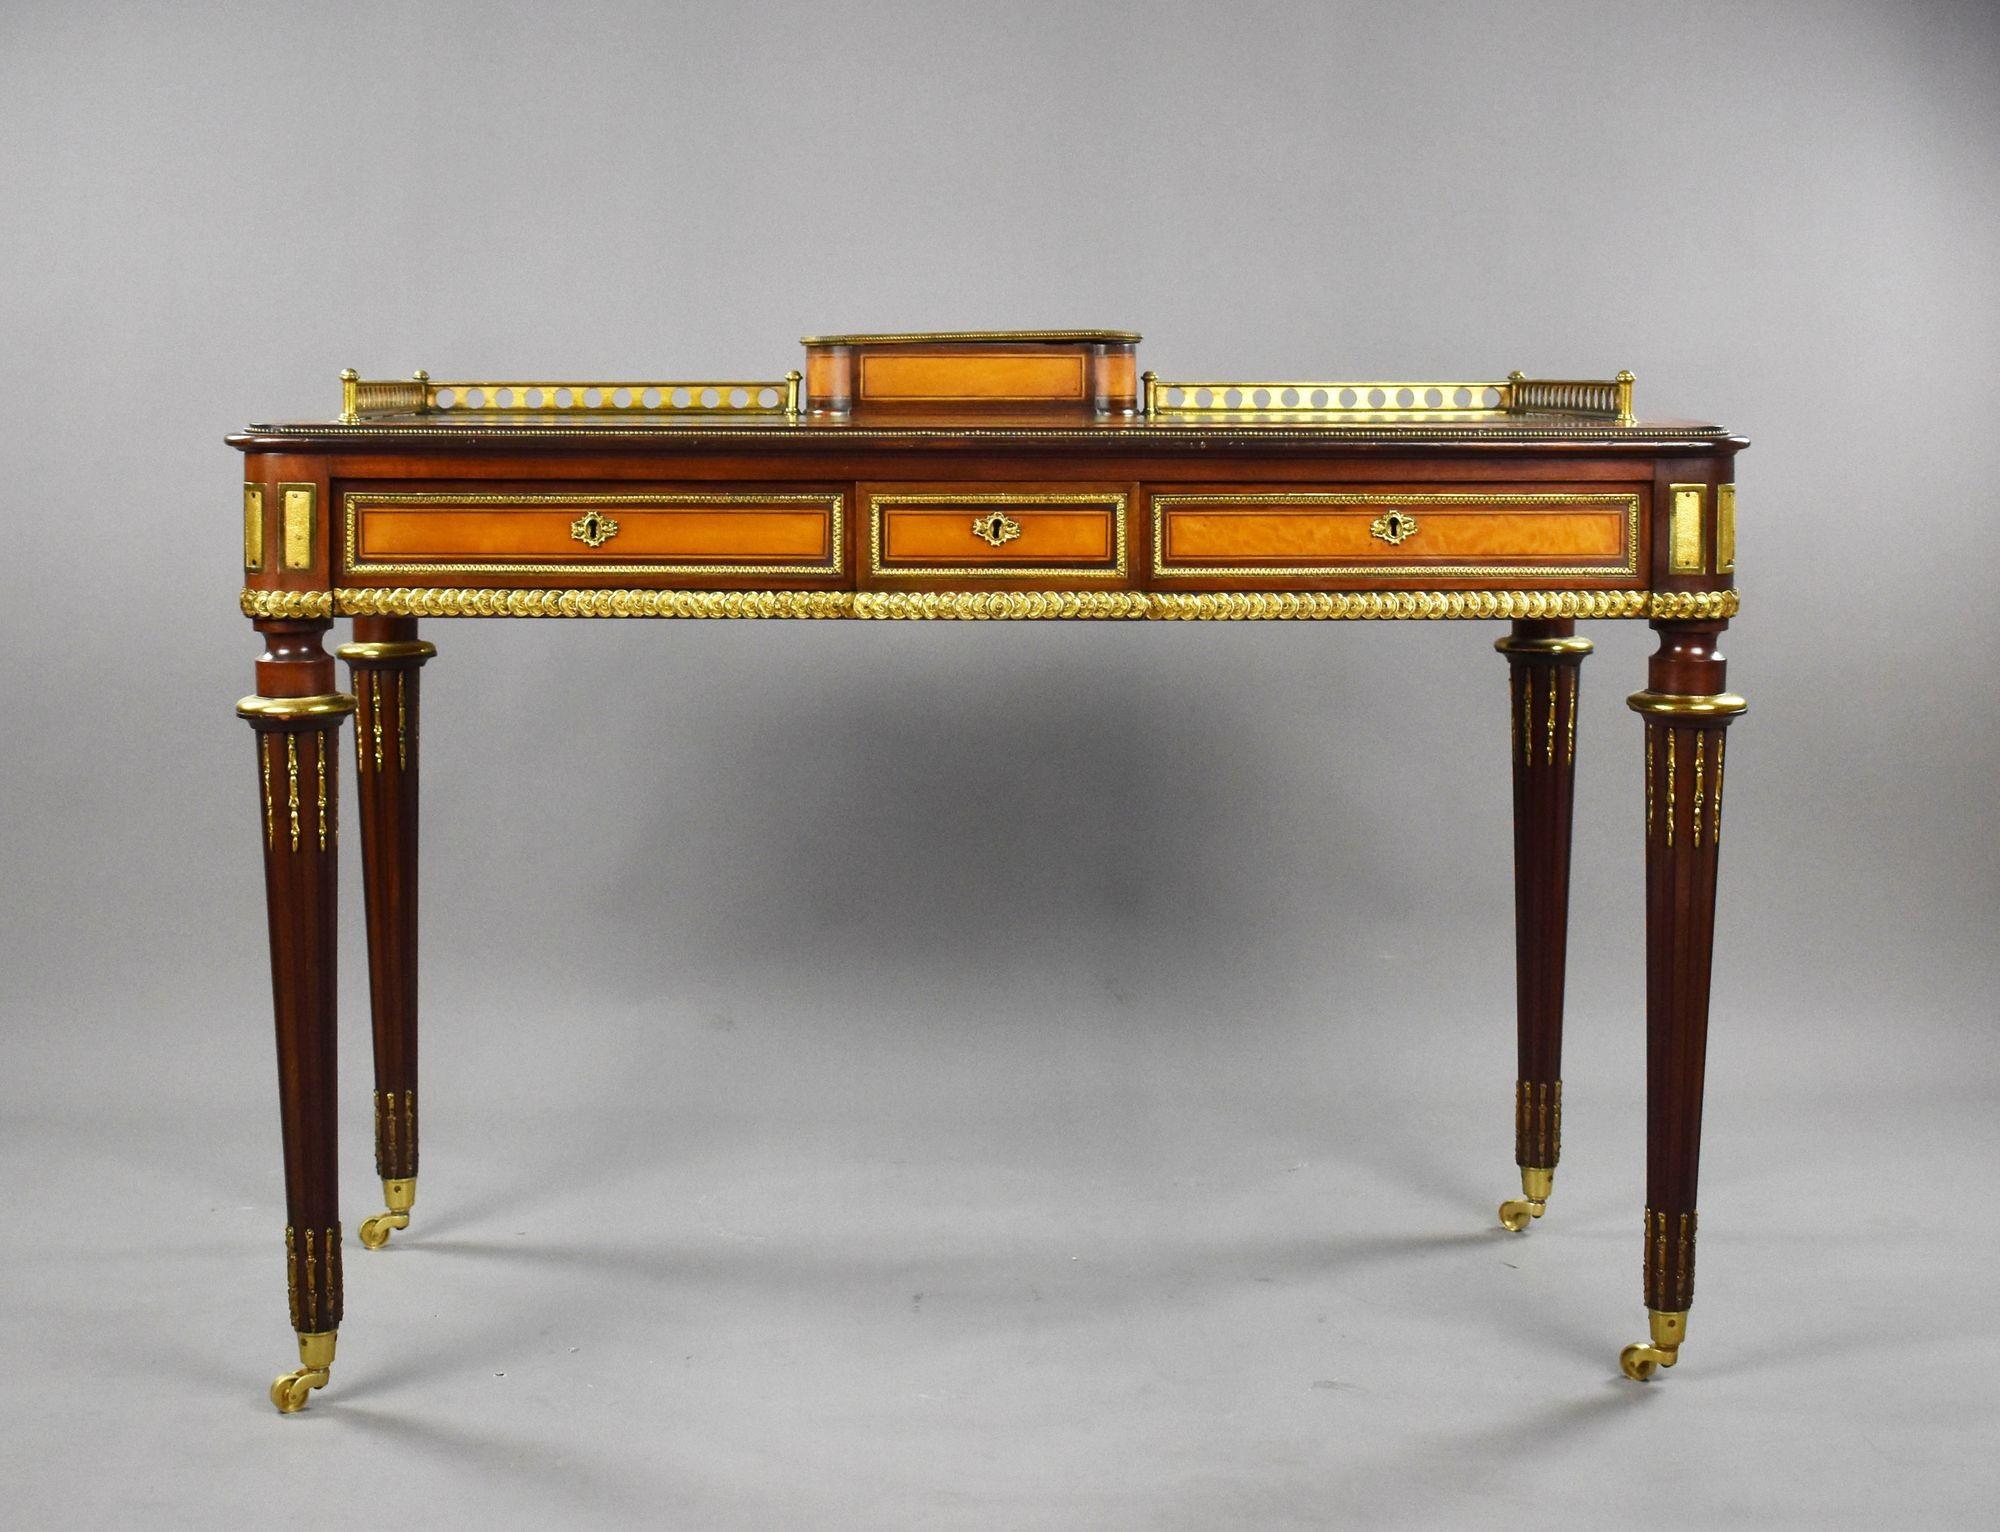 For sale is a top quality mahogany and satinwood writing table stamped Edwards & Roberts. Being constructed from mahogany and fine satinwood the writing table has a writing utensil compartment, with perforated three quarter brass gallery surrounded